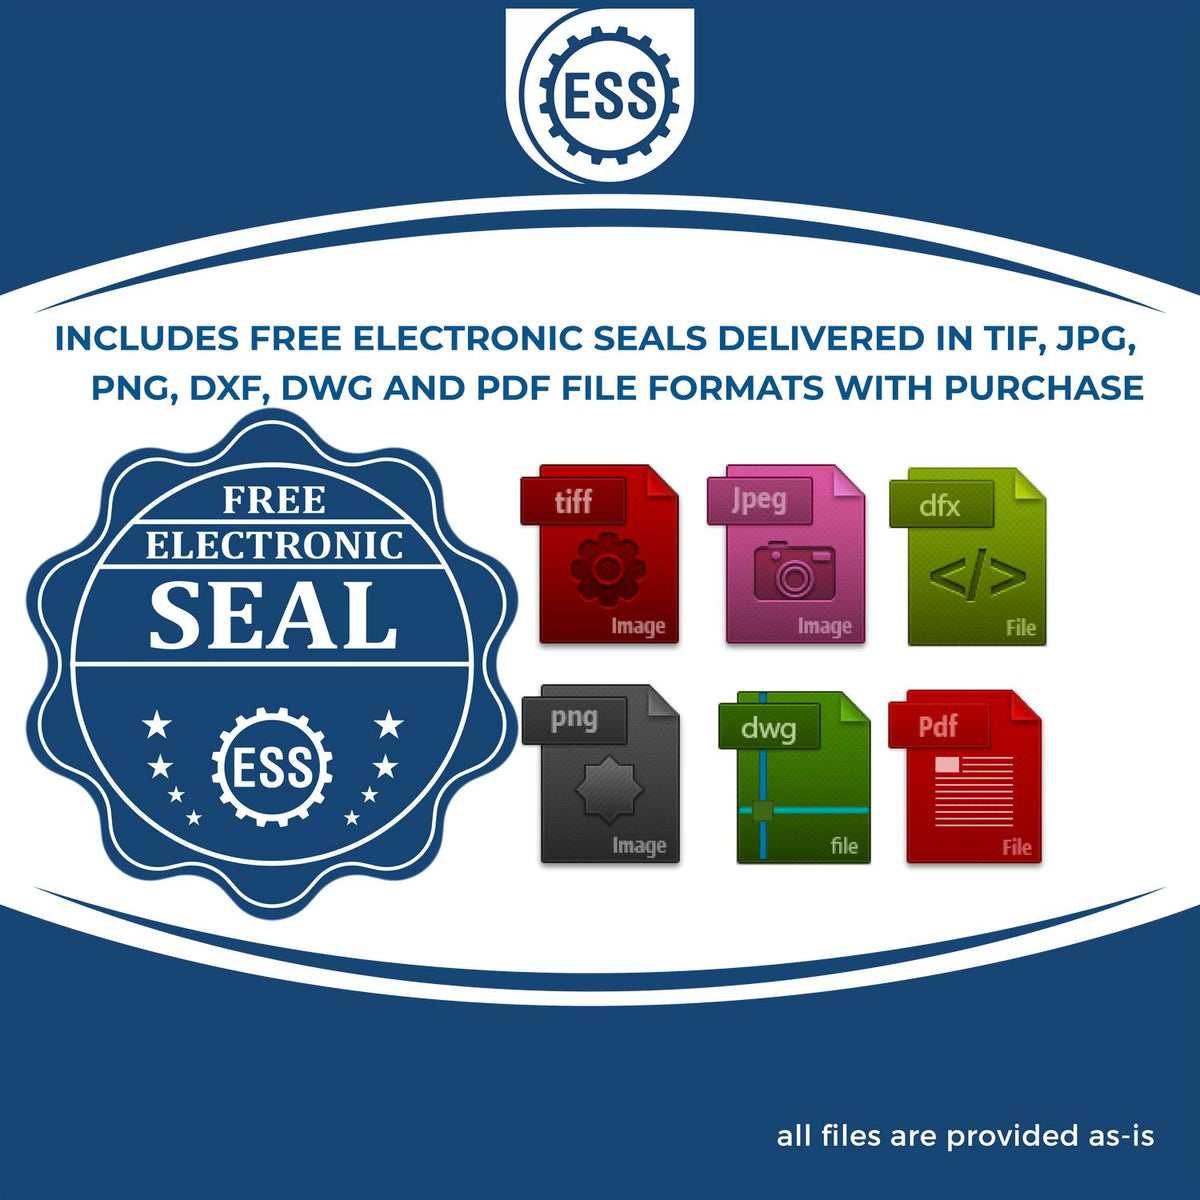 An infographic for the free electronic seal for the Gift Delaware Landscape Architect Seal illustrating the different file type icons such as DXF, DWG, TIF, JPG and PNG.